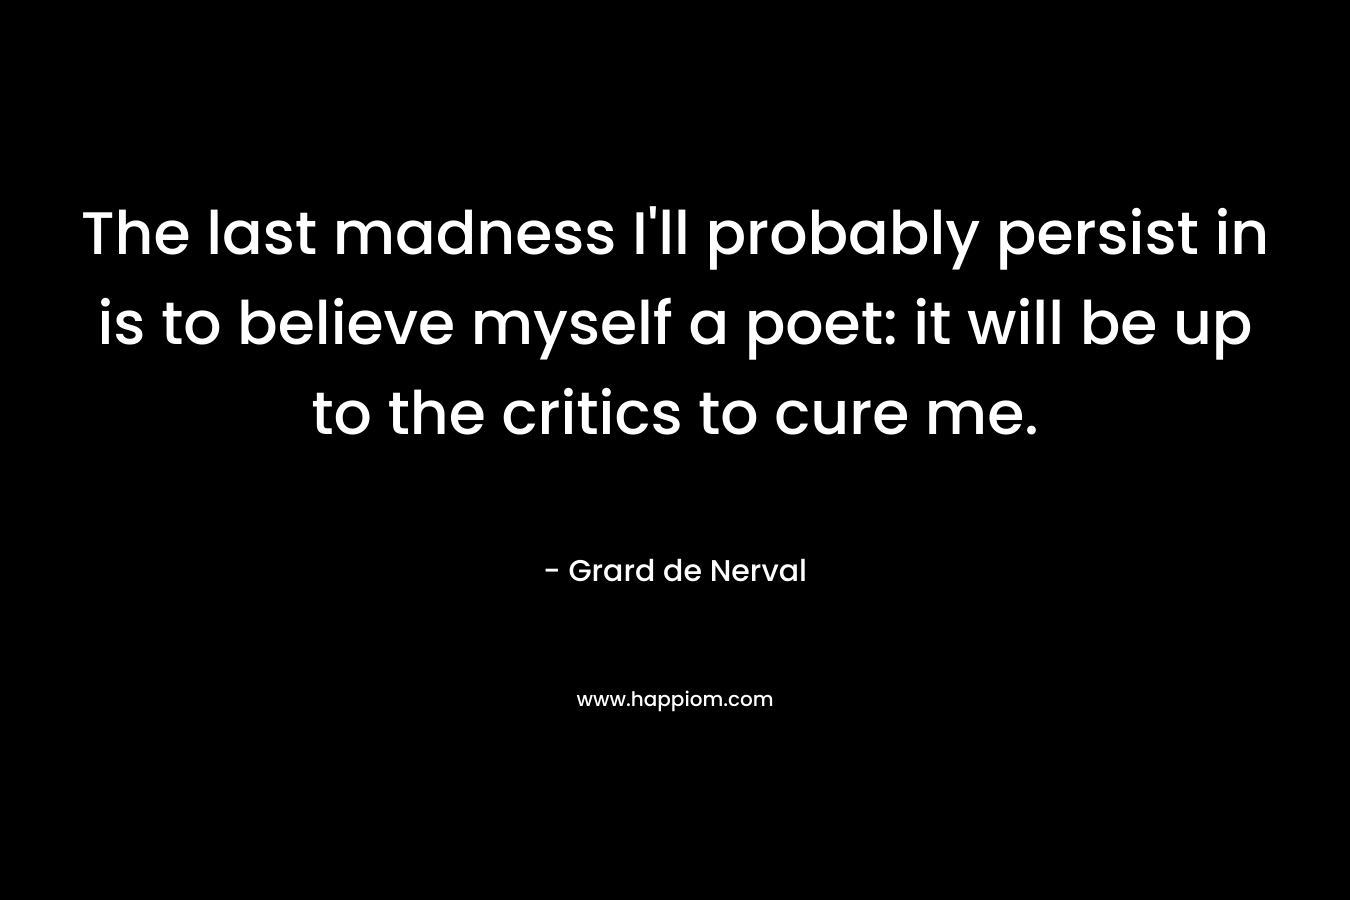 The last madness I'll probably persist in is to believe myself a poet: it will be up to the critics to cure me.